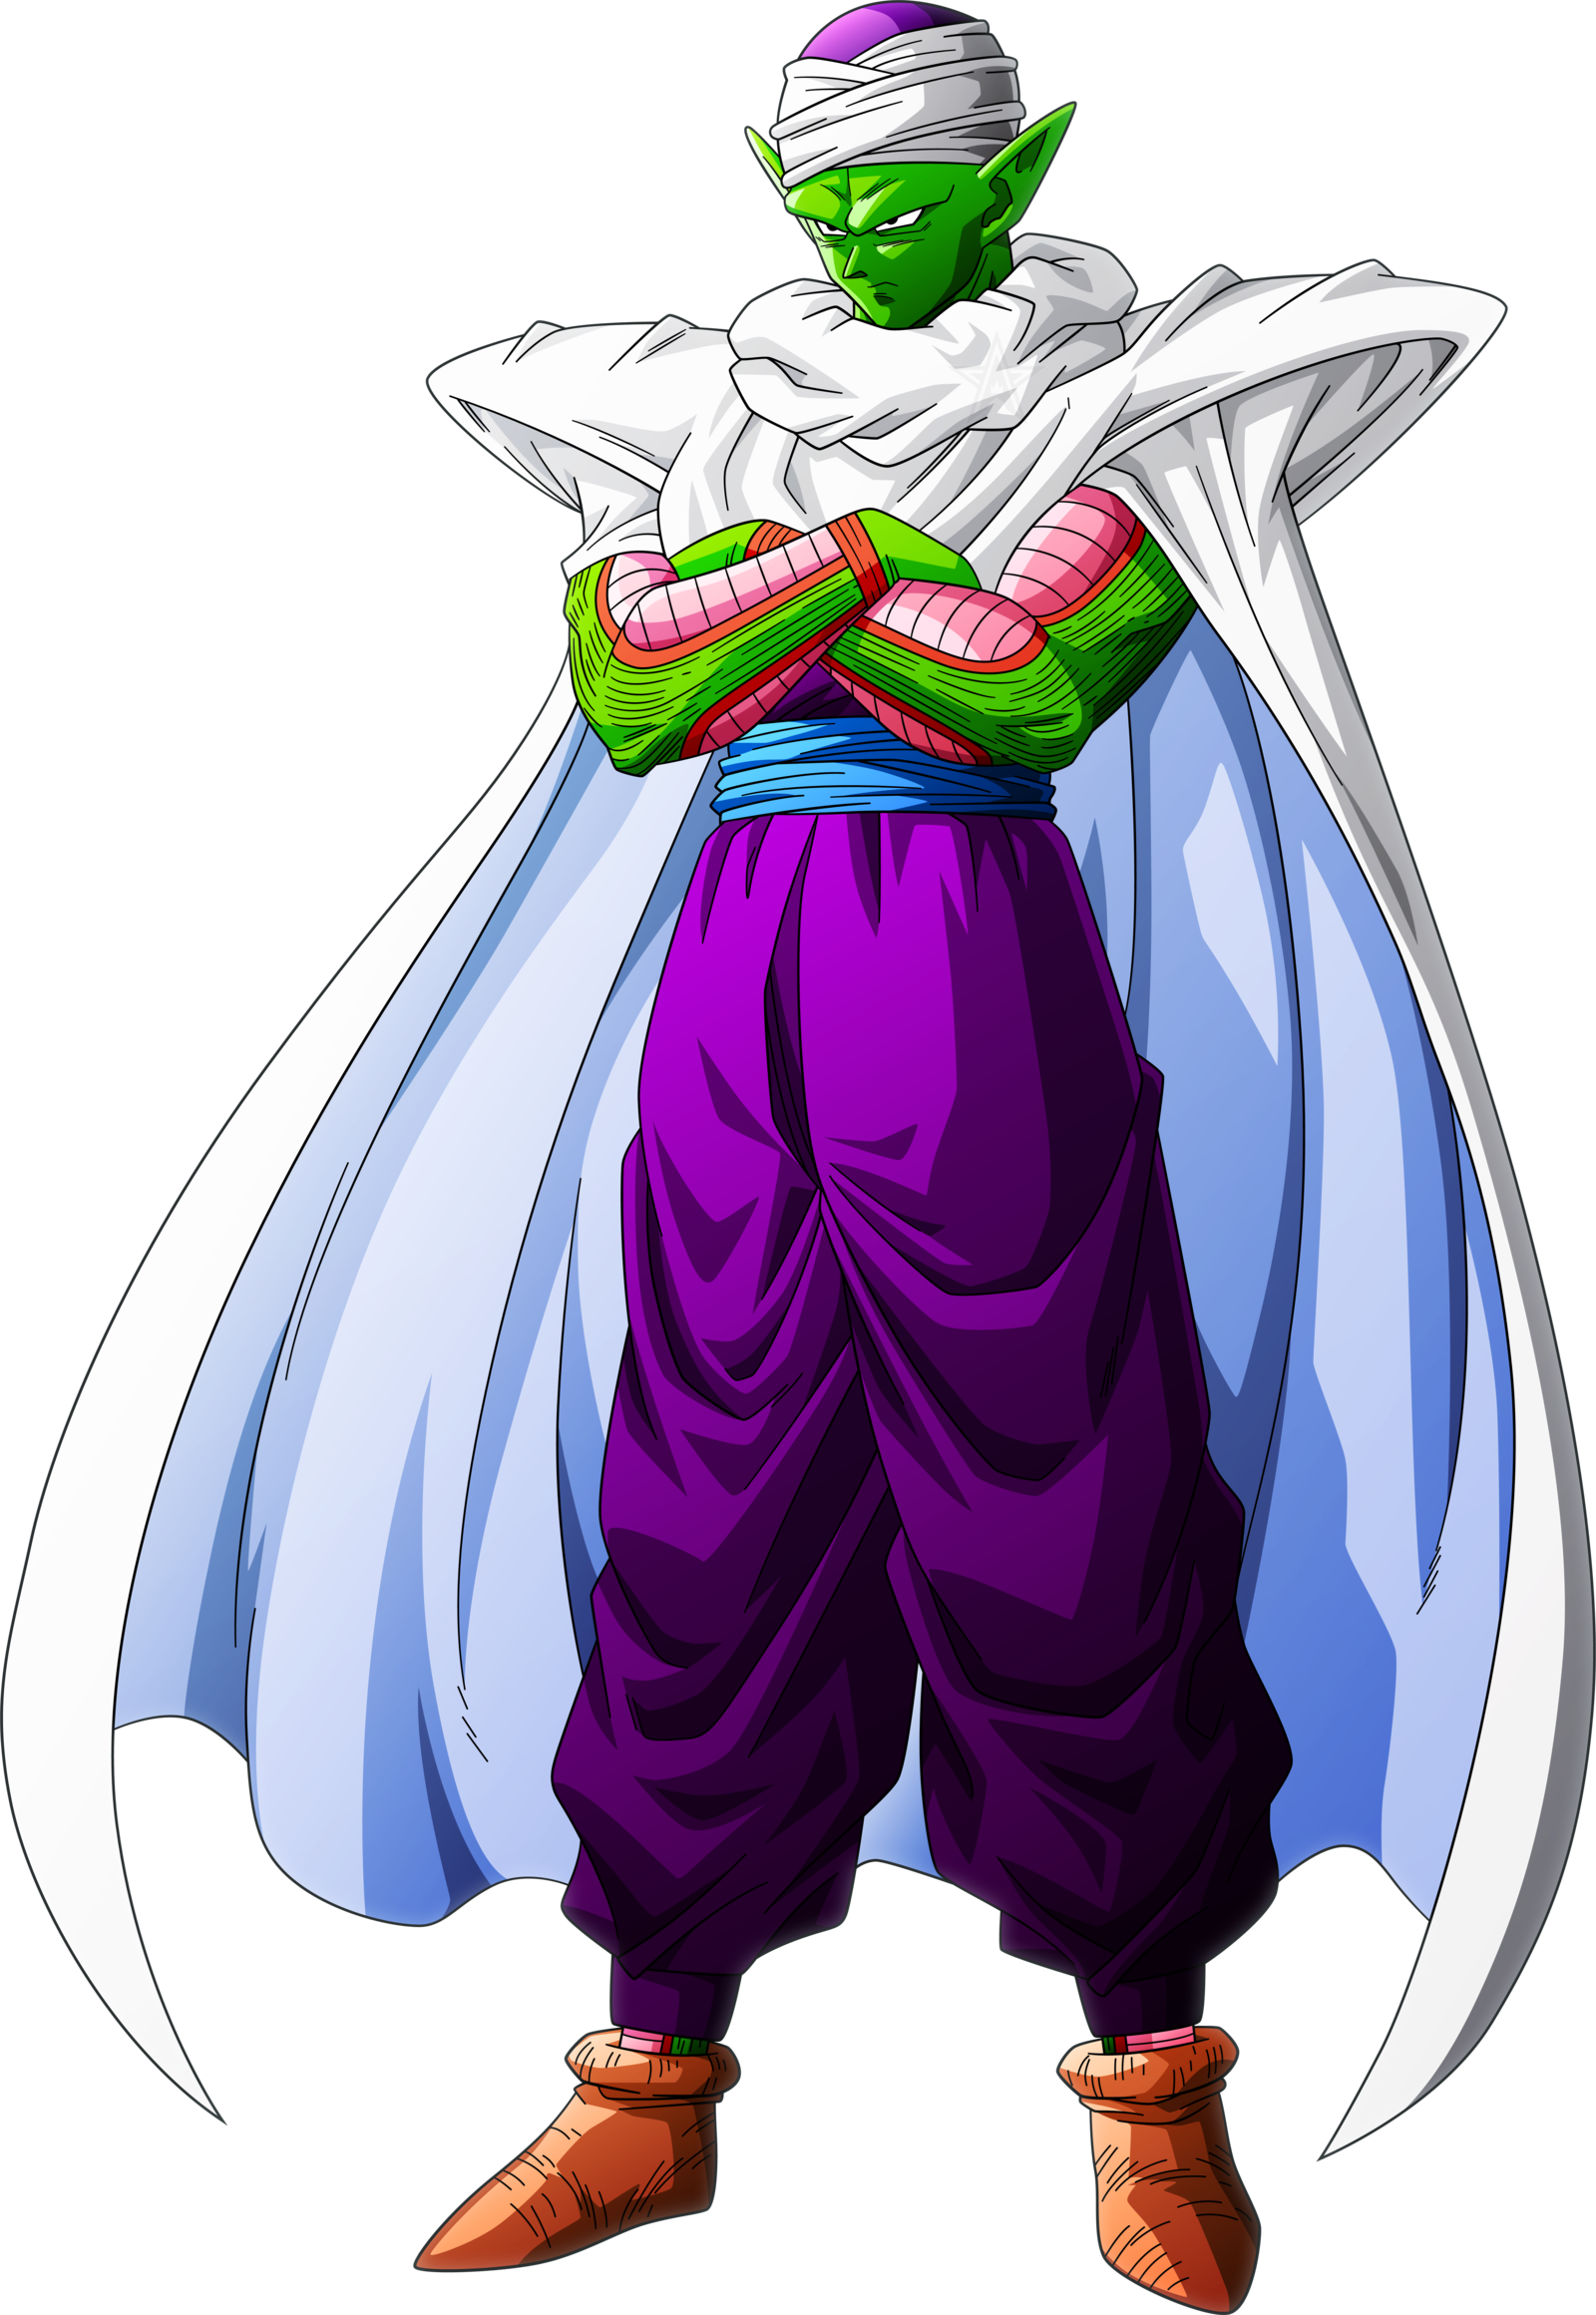 Image - Piccolo.png | FanFiction Characters Wiki | FANDOM ...